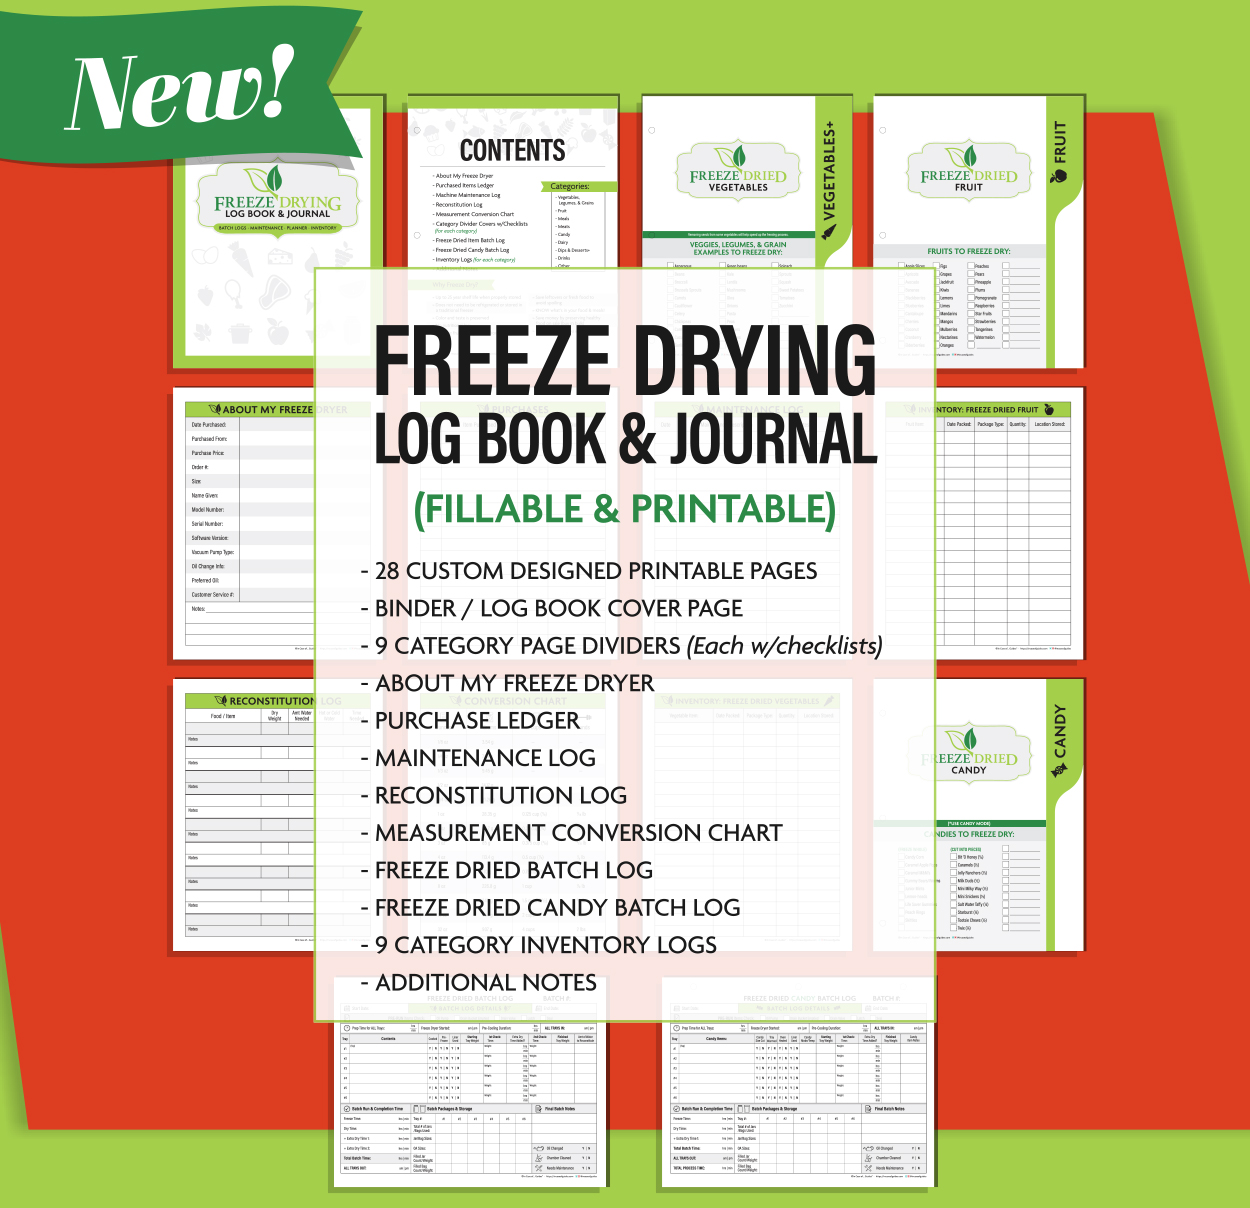 Freeze Dryer Log Book & Journal Printable and fillable pdfs